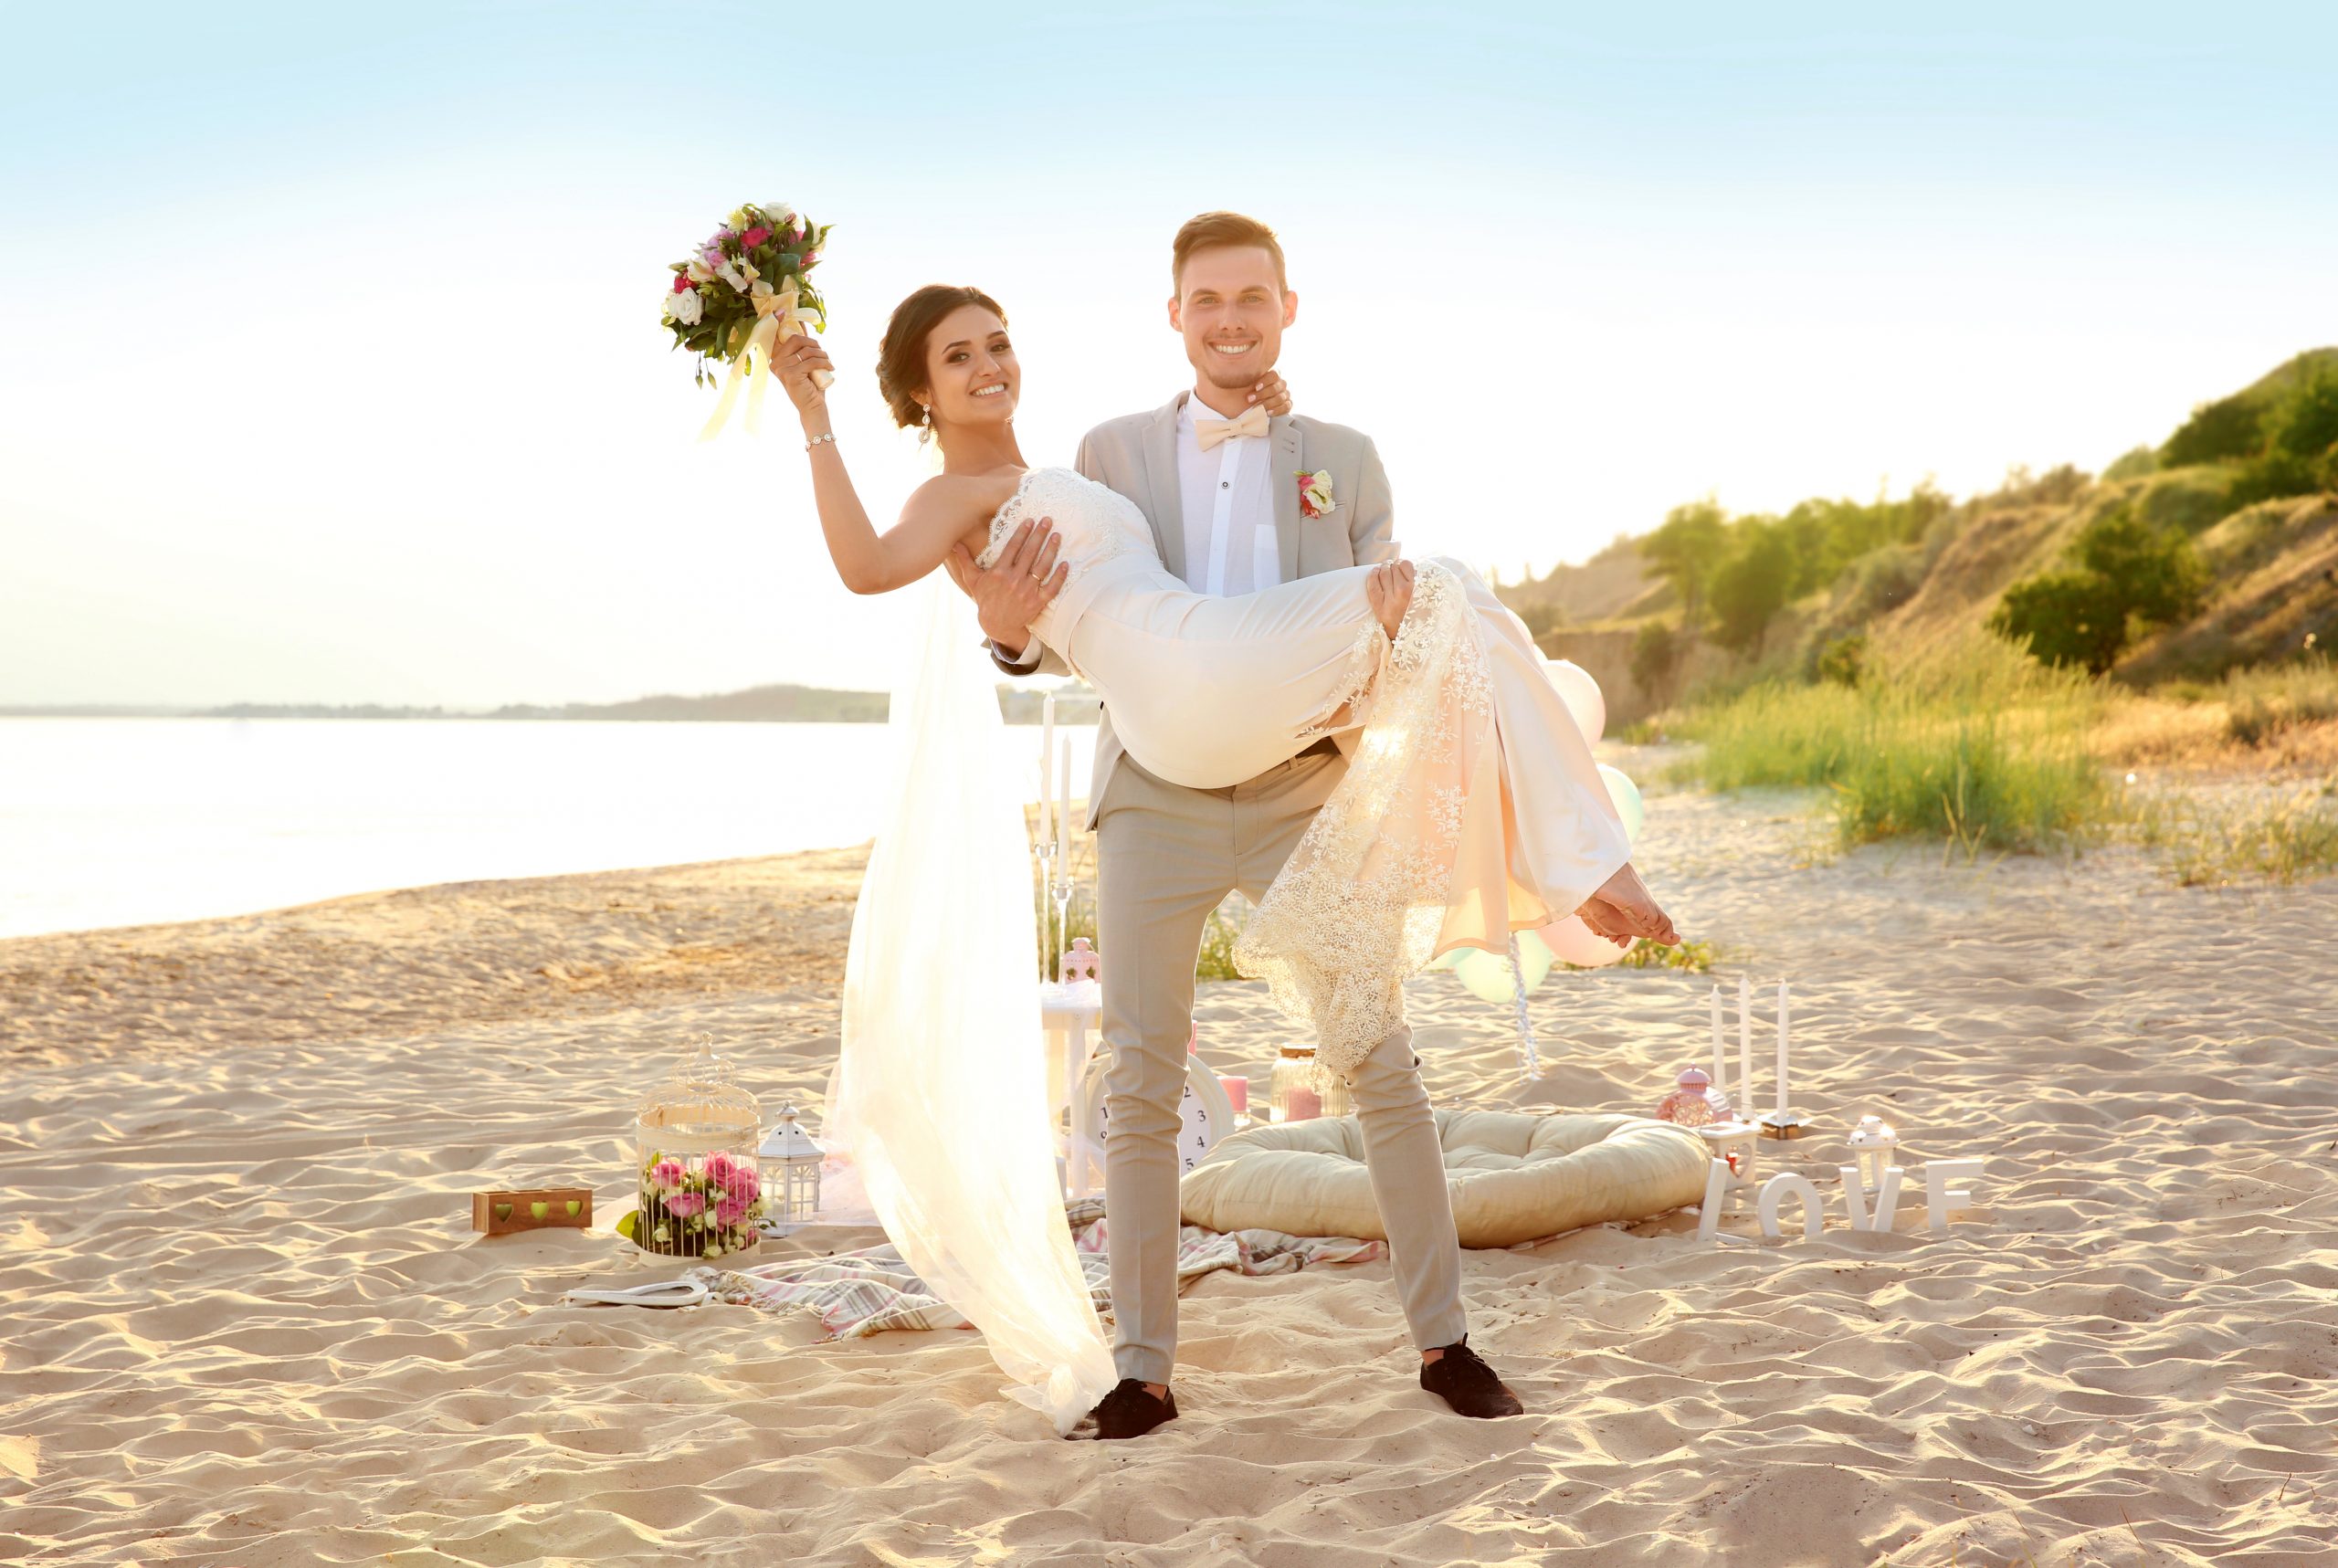 Tips for Planning the Perfect Vow Renewal Cruise